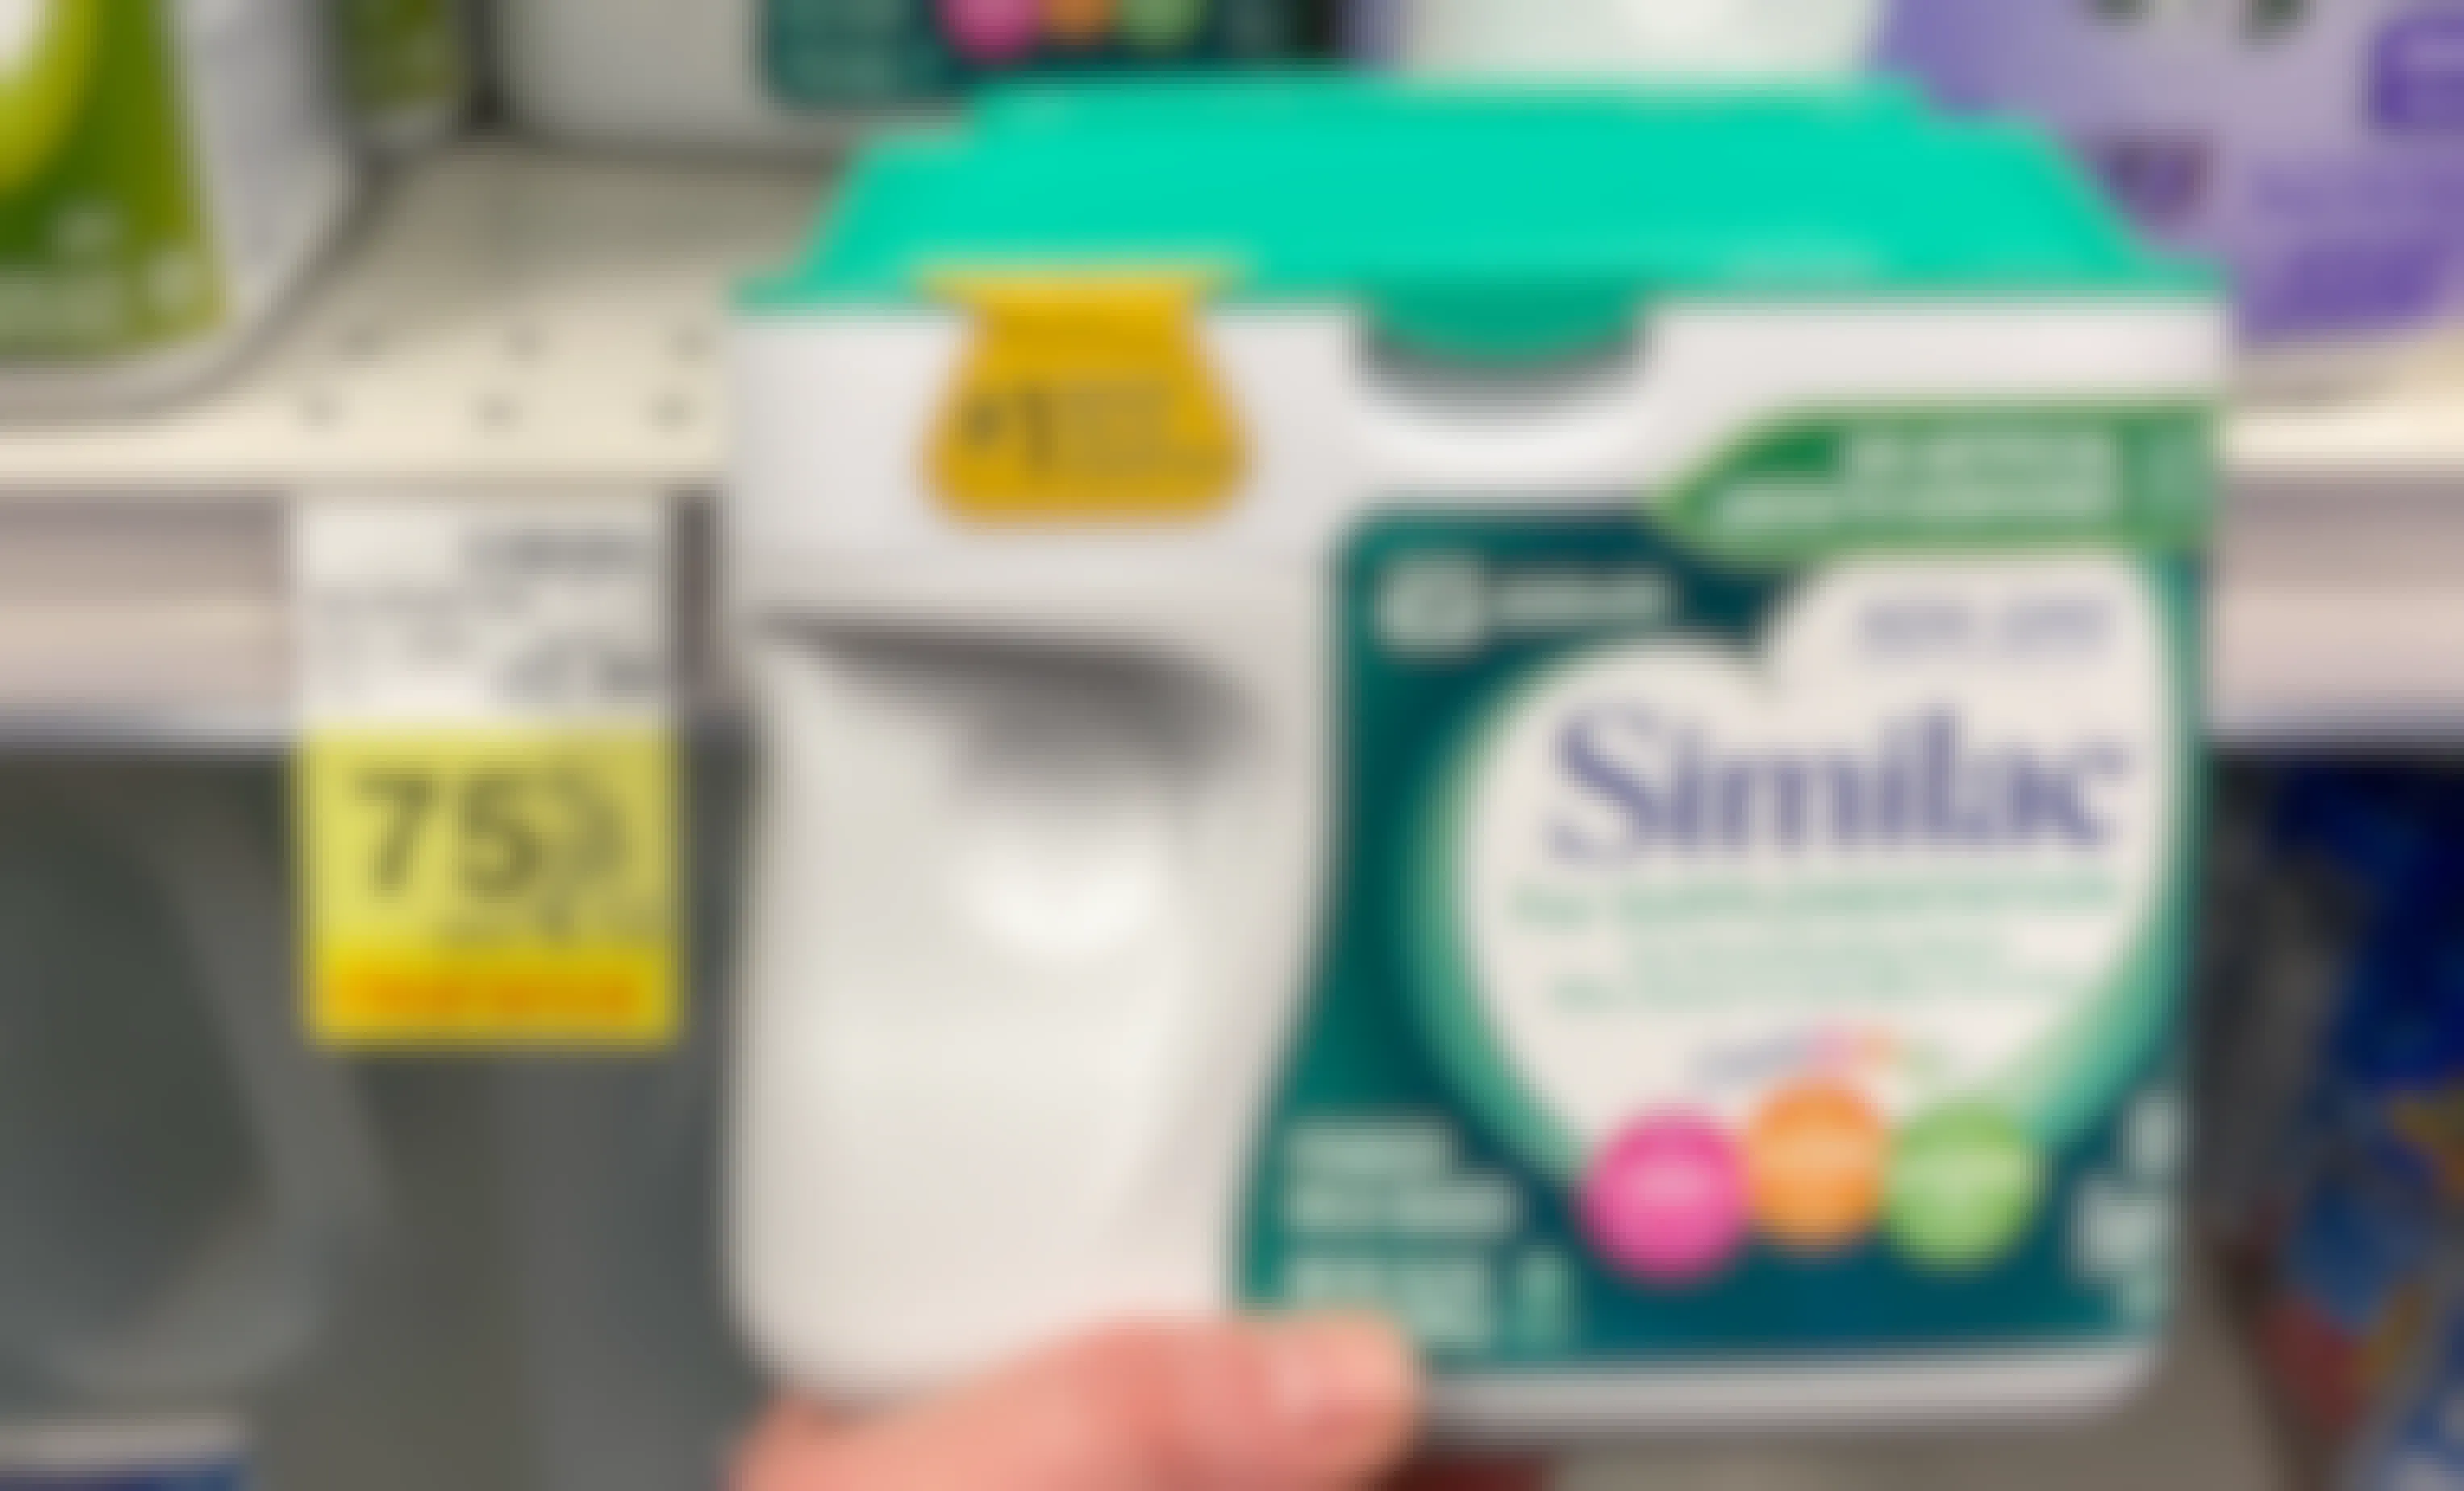 A person's hand holding a container of Similac next to a sale tag for 75% off in CVS.